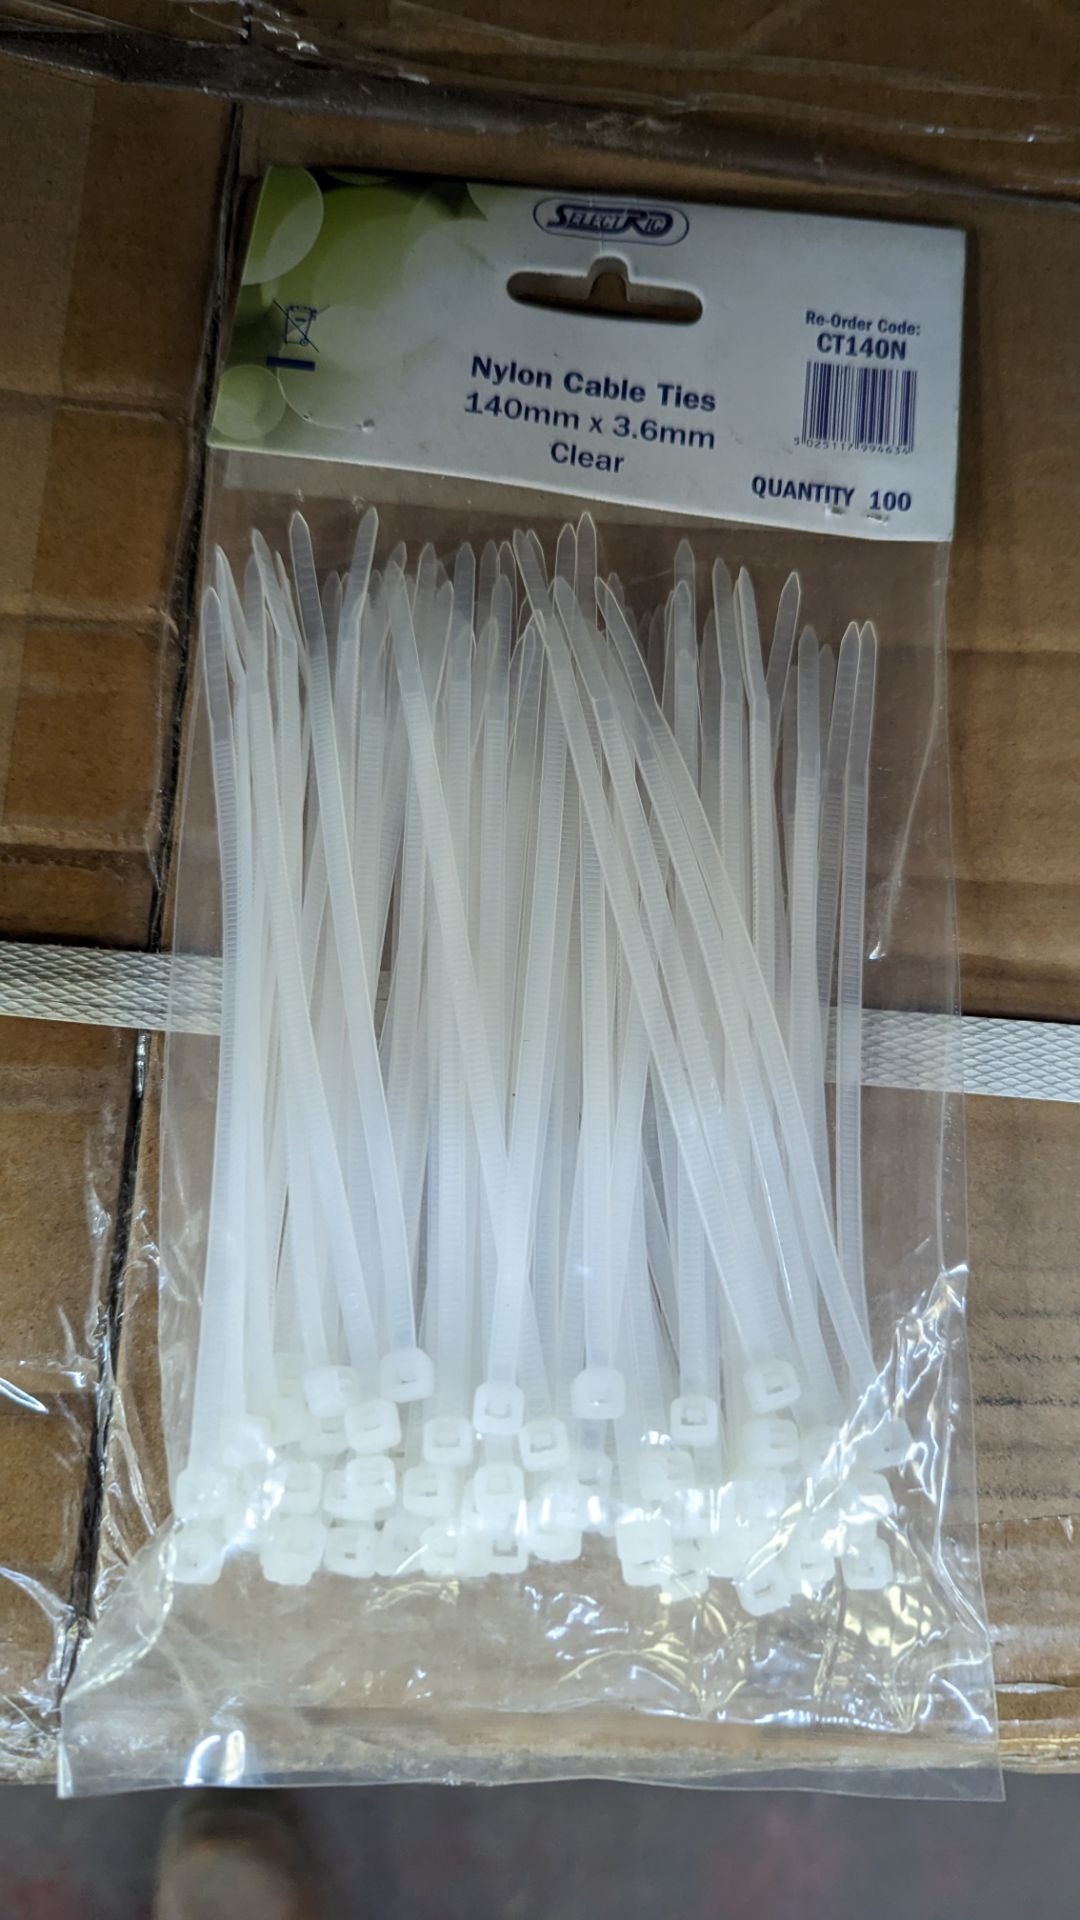 Box of 140mm x 3.6mm clear cable ties - 100 ties per pack. 25,000 ties in the box/lot - Image 3 of 4